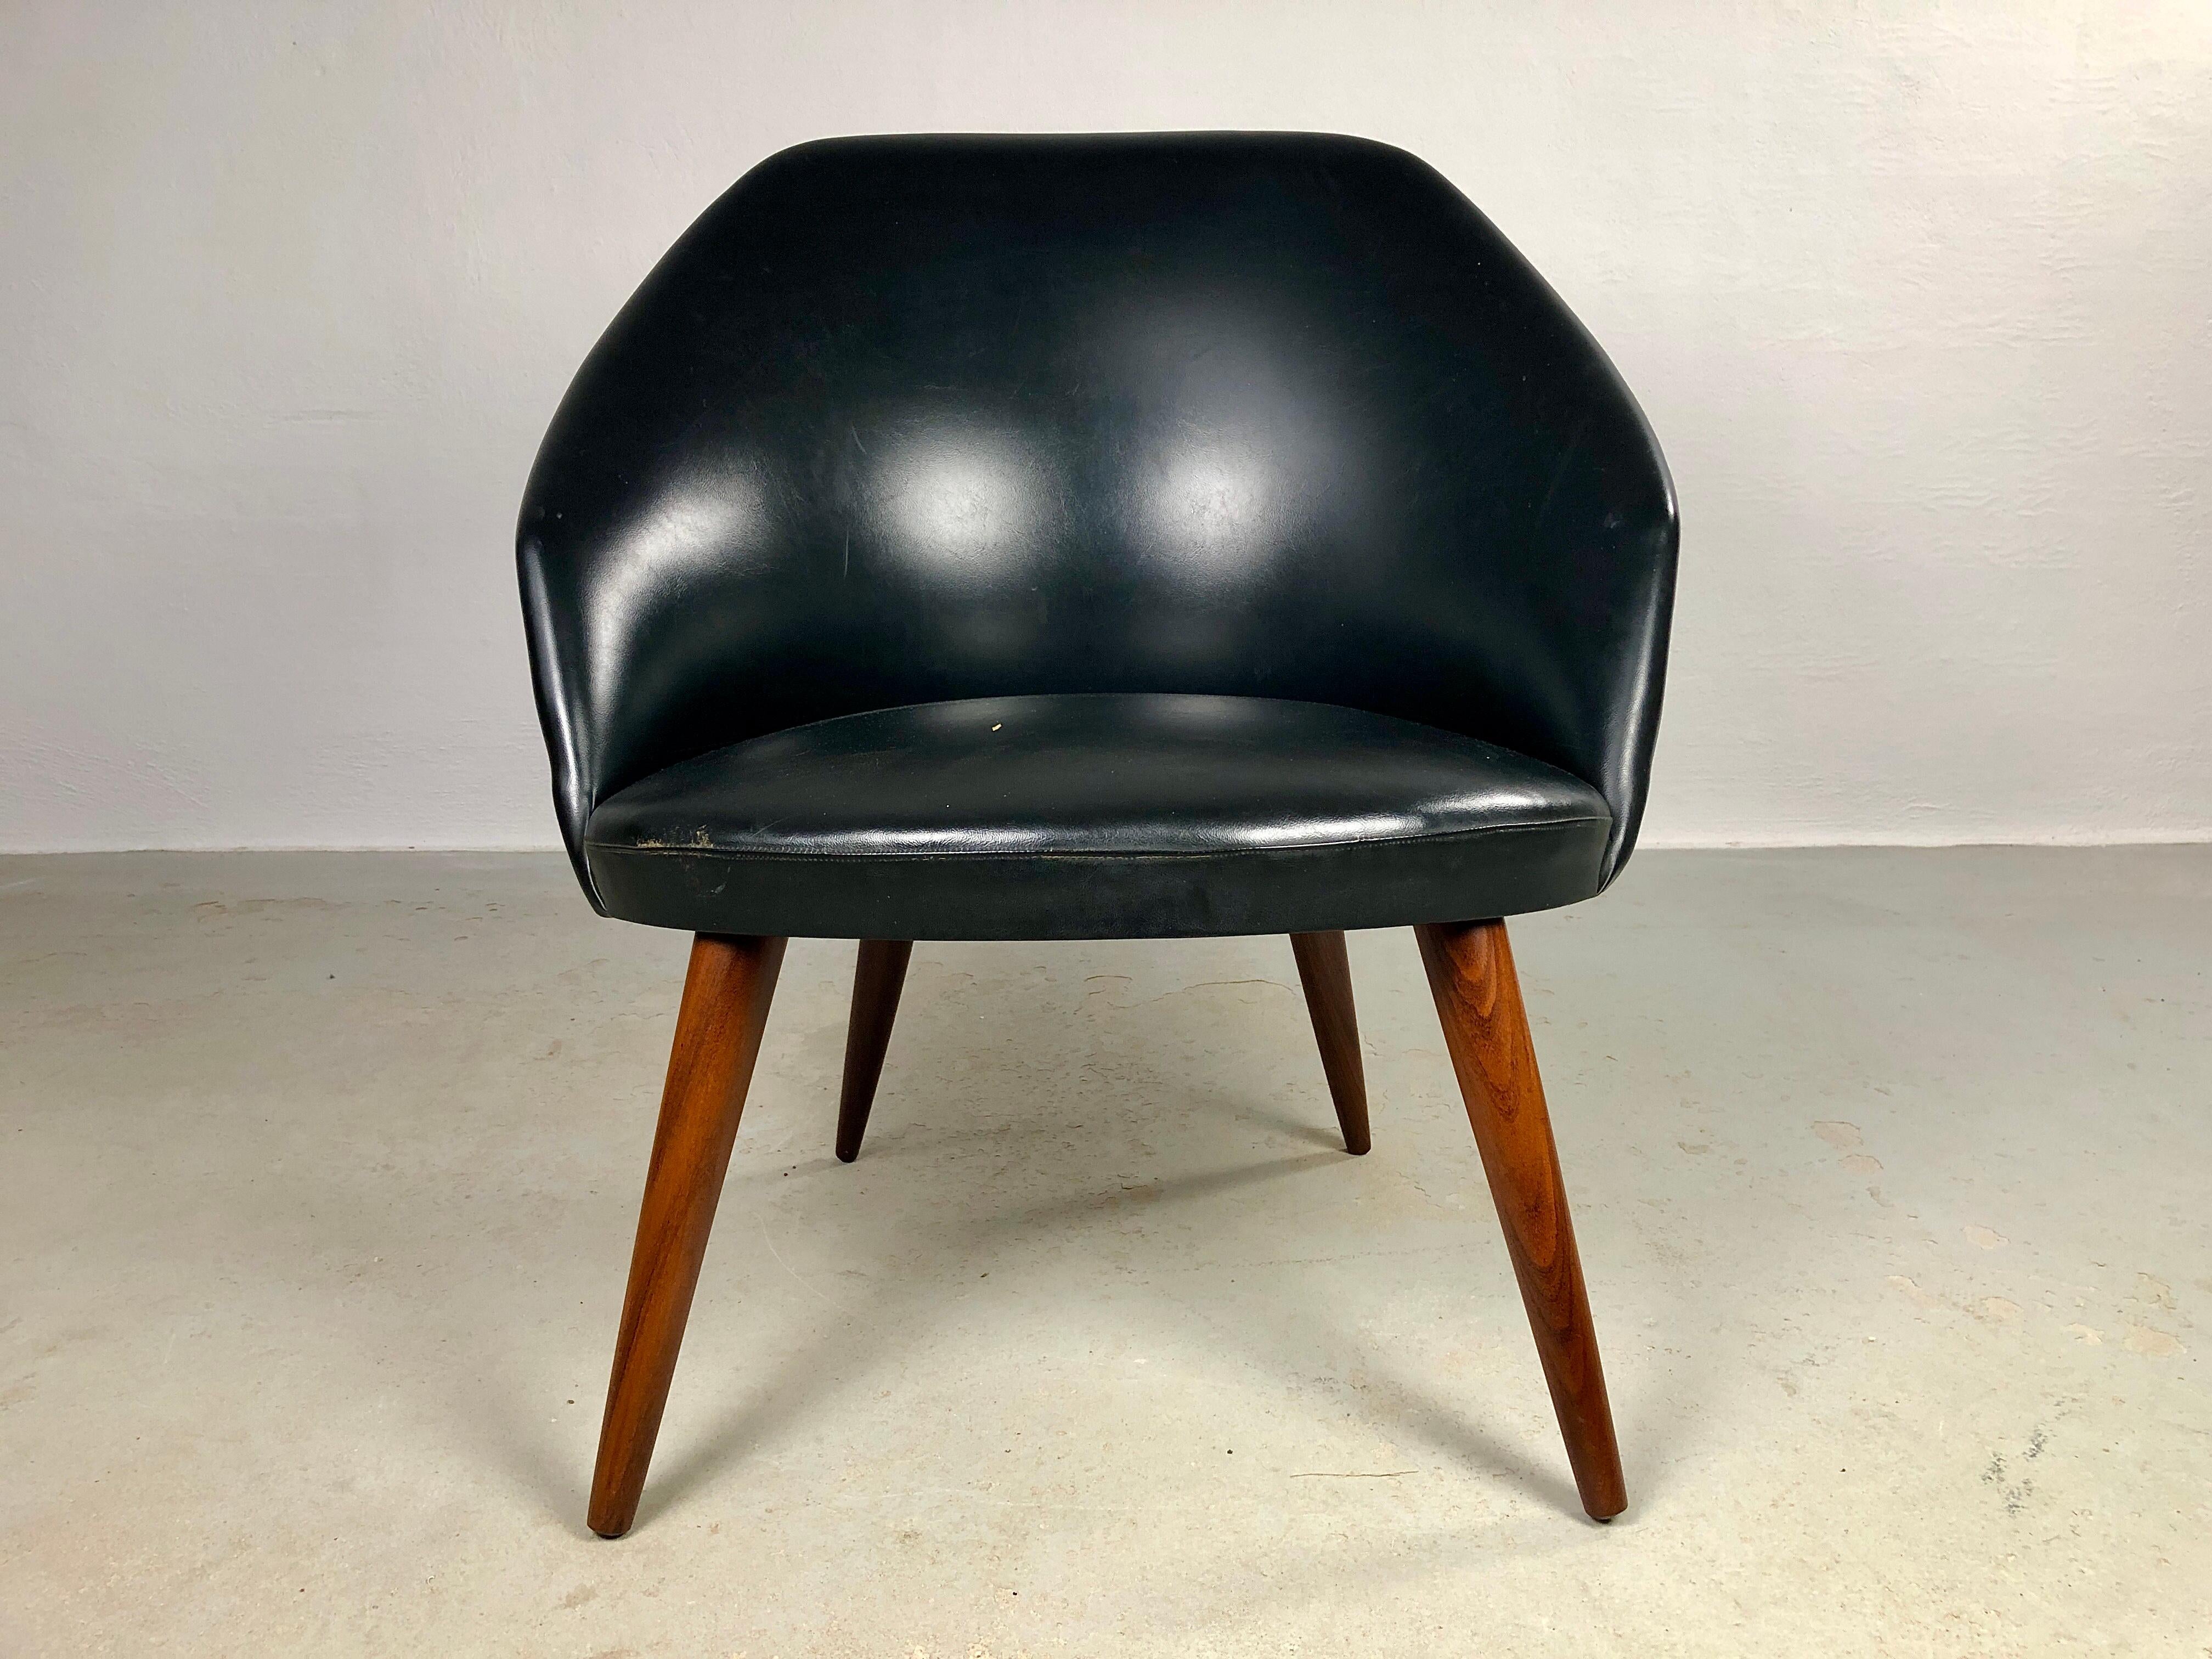 Fully restored Danish lounge chair reupholstered in black leather.

The lounge chair feature soft the organic shapes from the circular seat to the rounded backrest.

The chair is in excellent condition after having been carefully restored by our